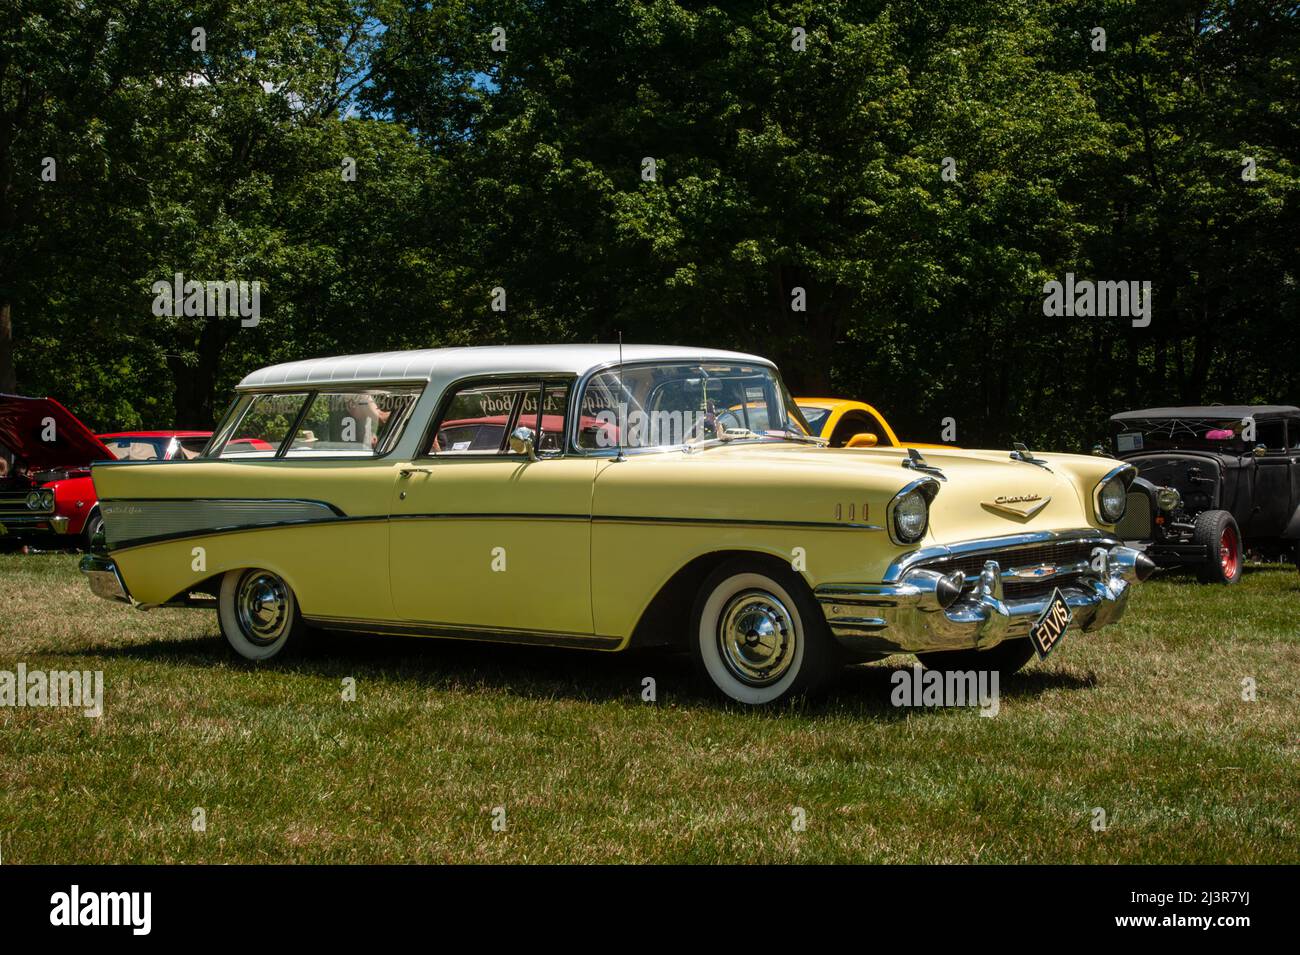 Grand Ledge, MI - July 8, 2017: Yellow 1957 Chevrolet Nomad at a local car show. Stock Photo